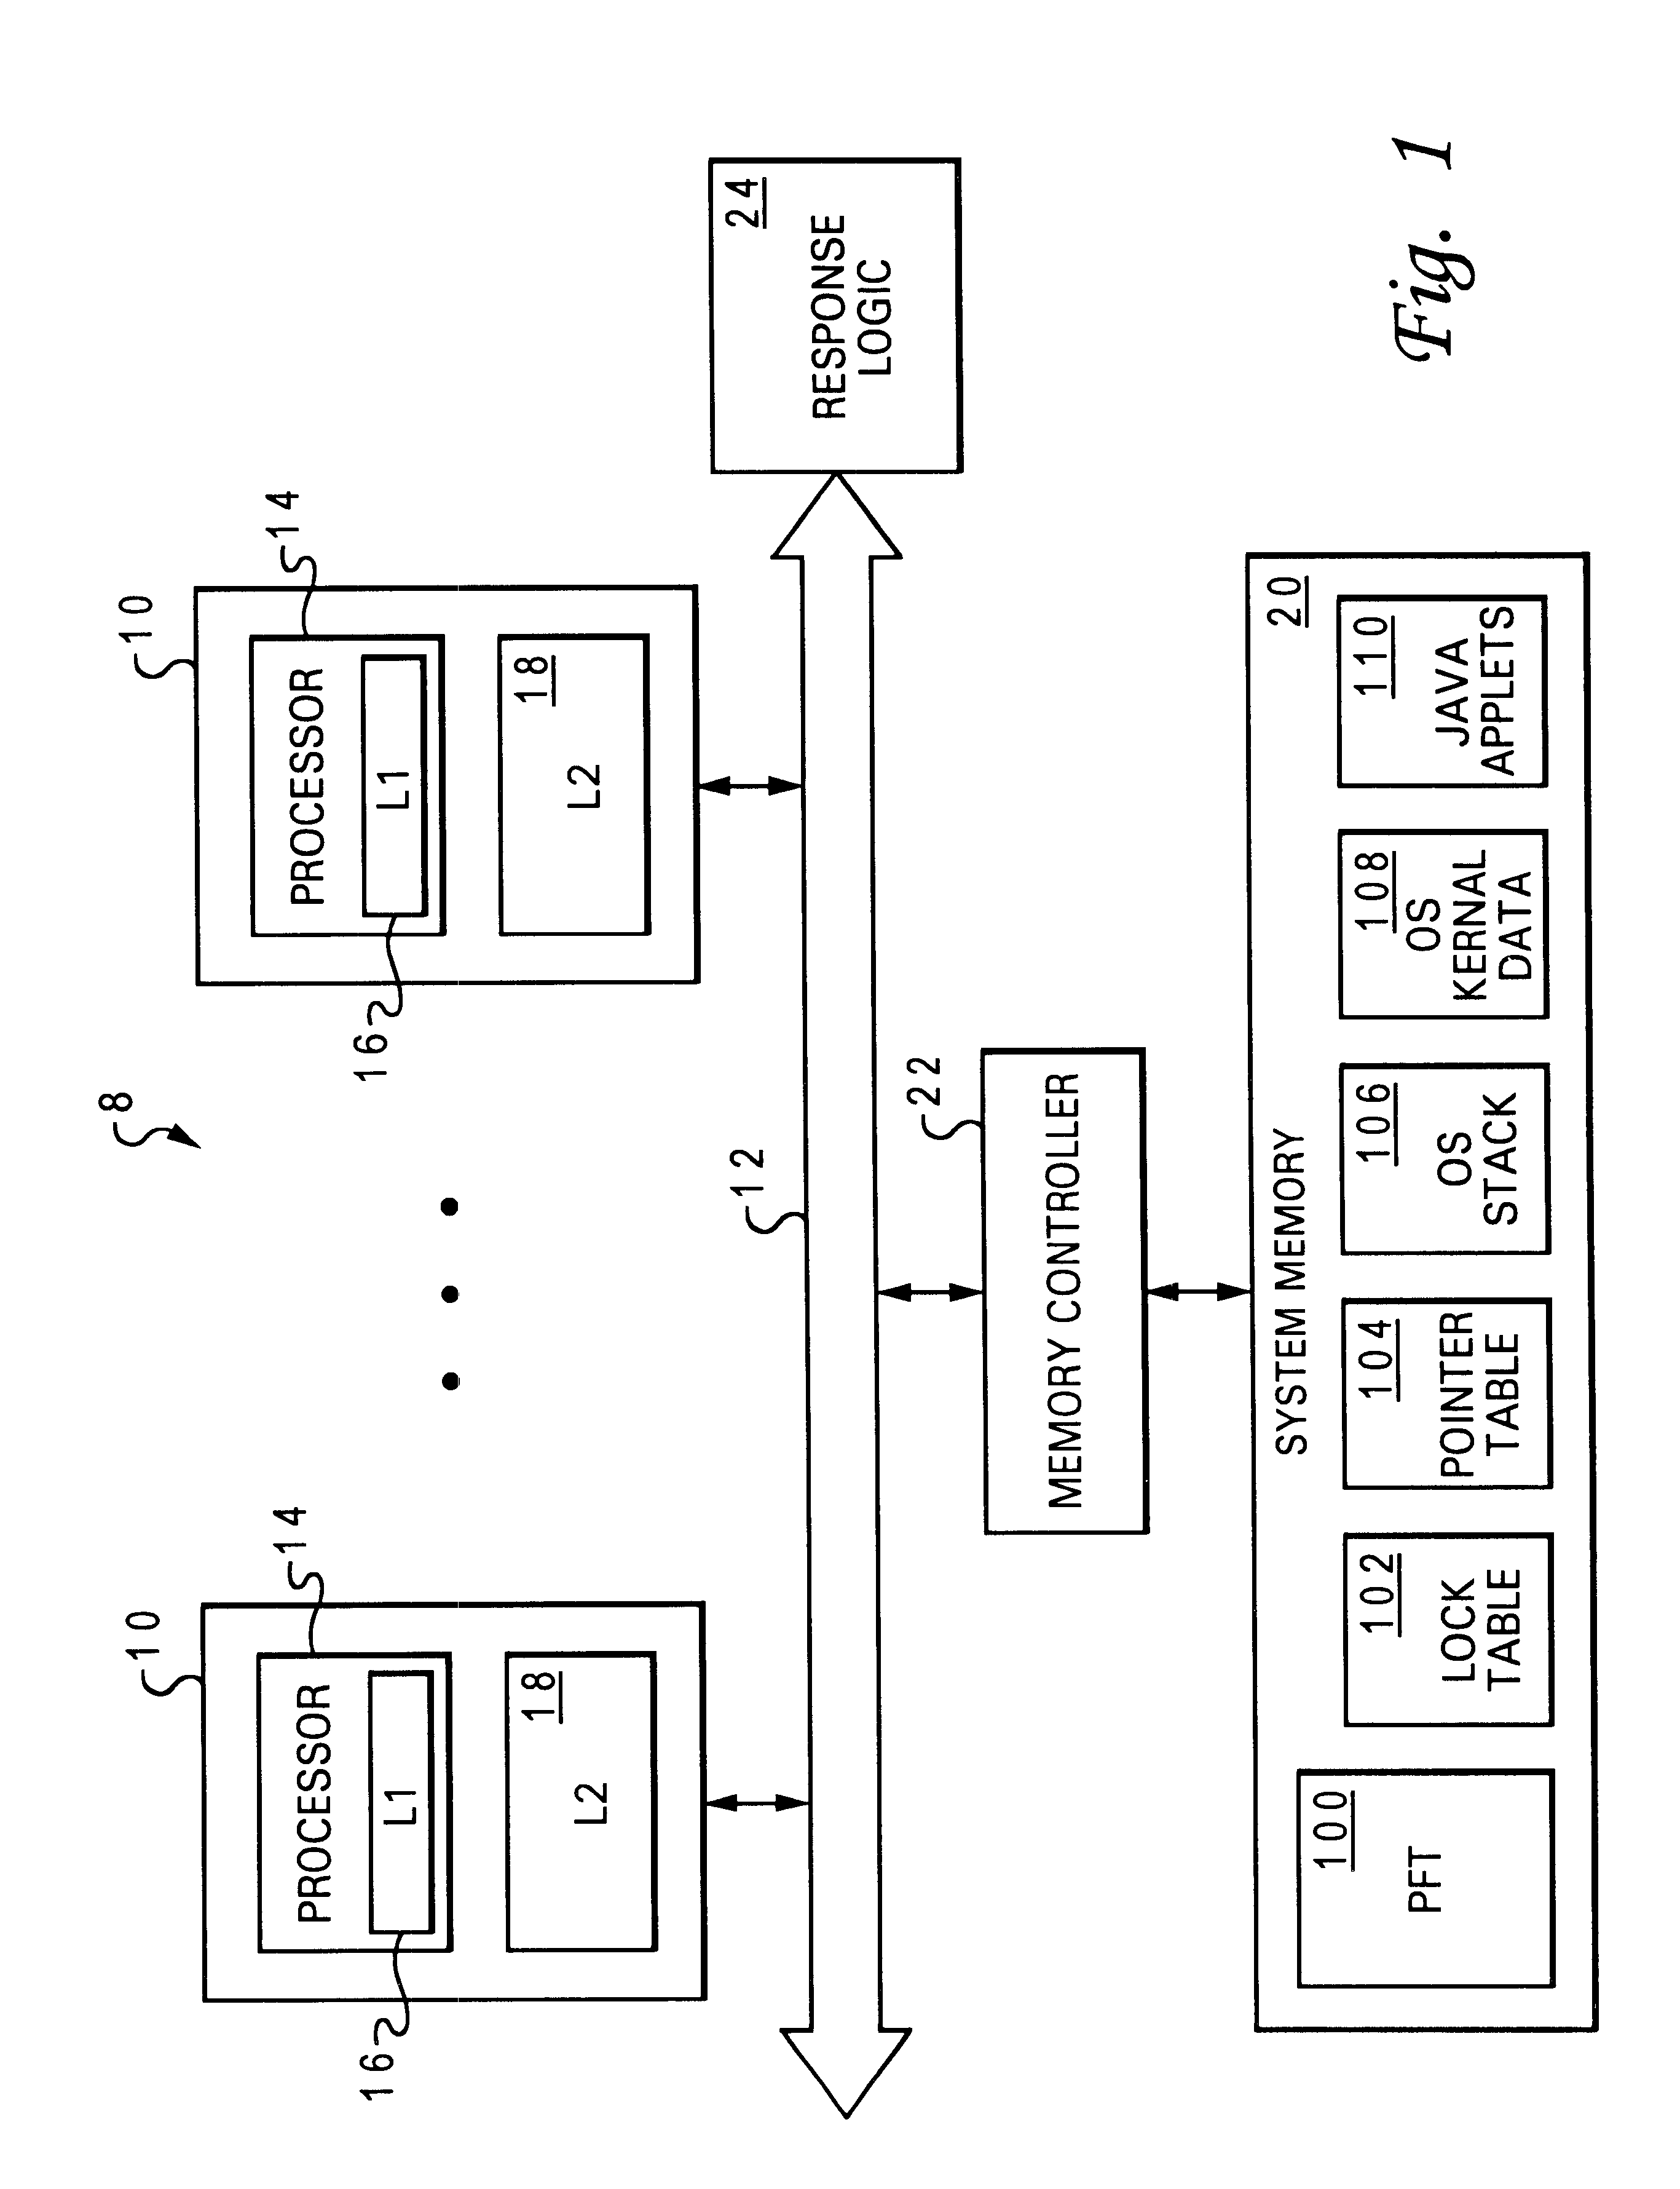 Method of cache management to dynamically update information-type dependent cache policies